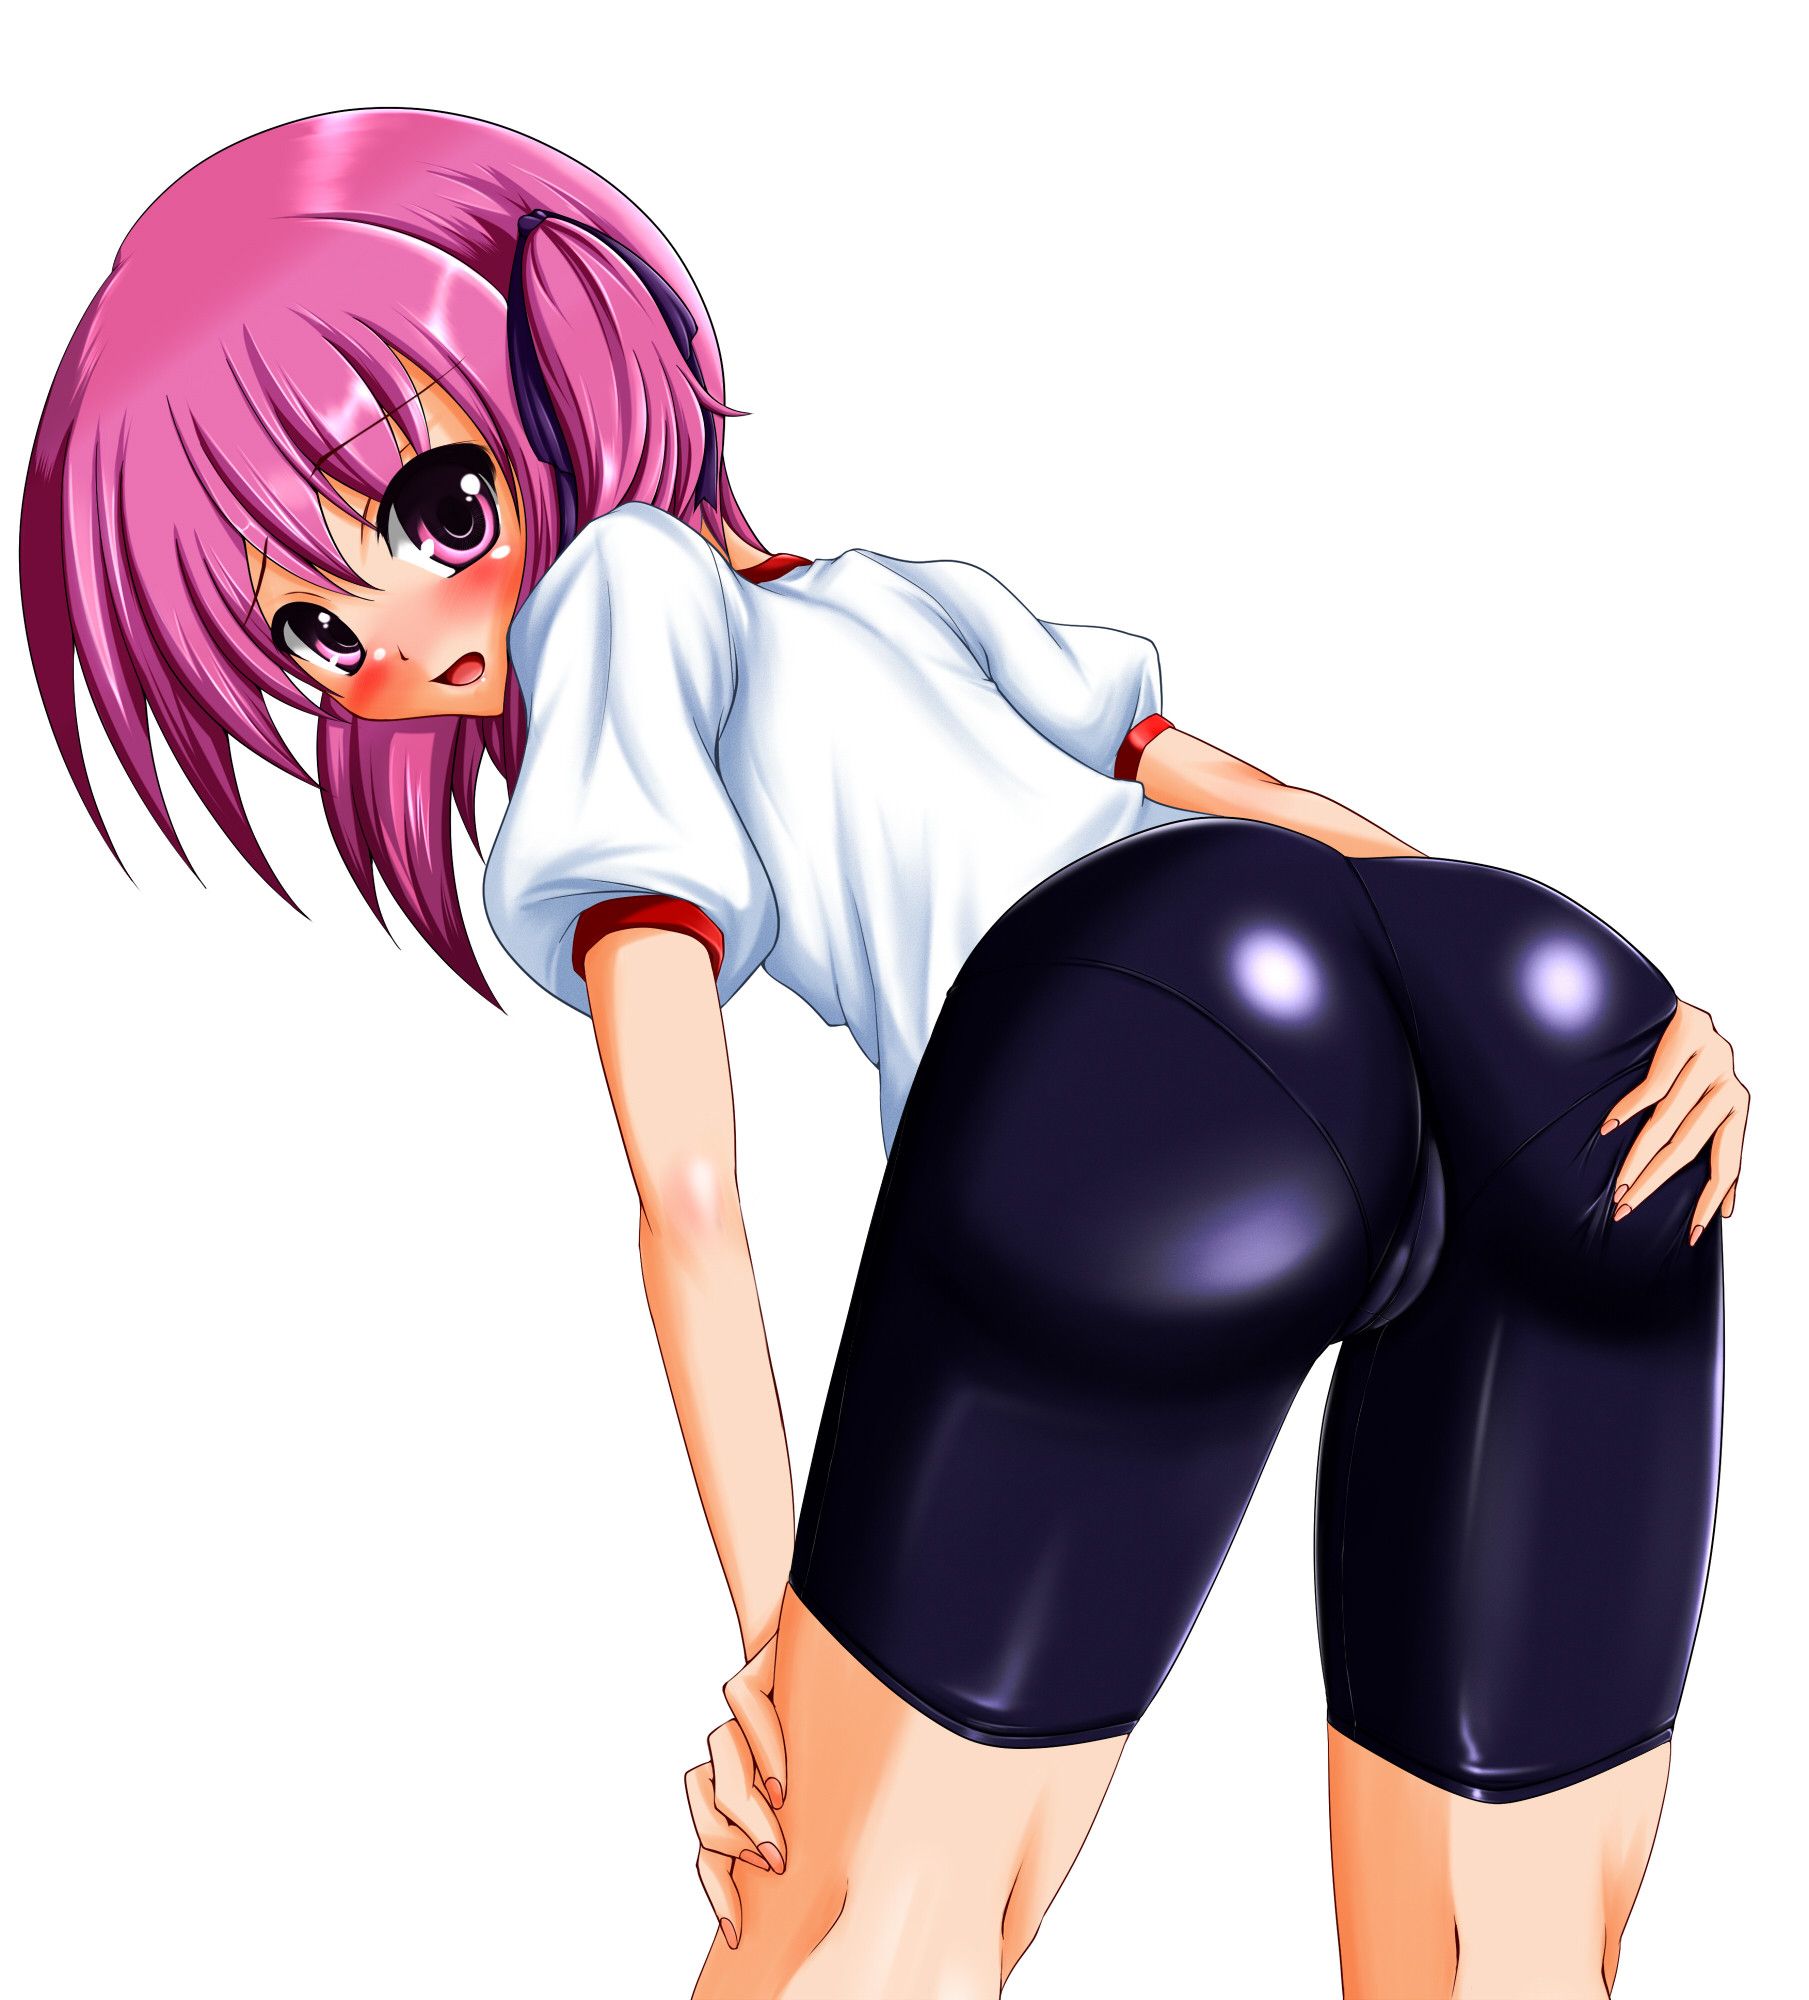 [Secondary/ZIP] The second erotic image of the girl wearing spats 12 12